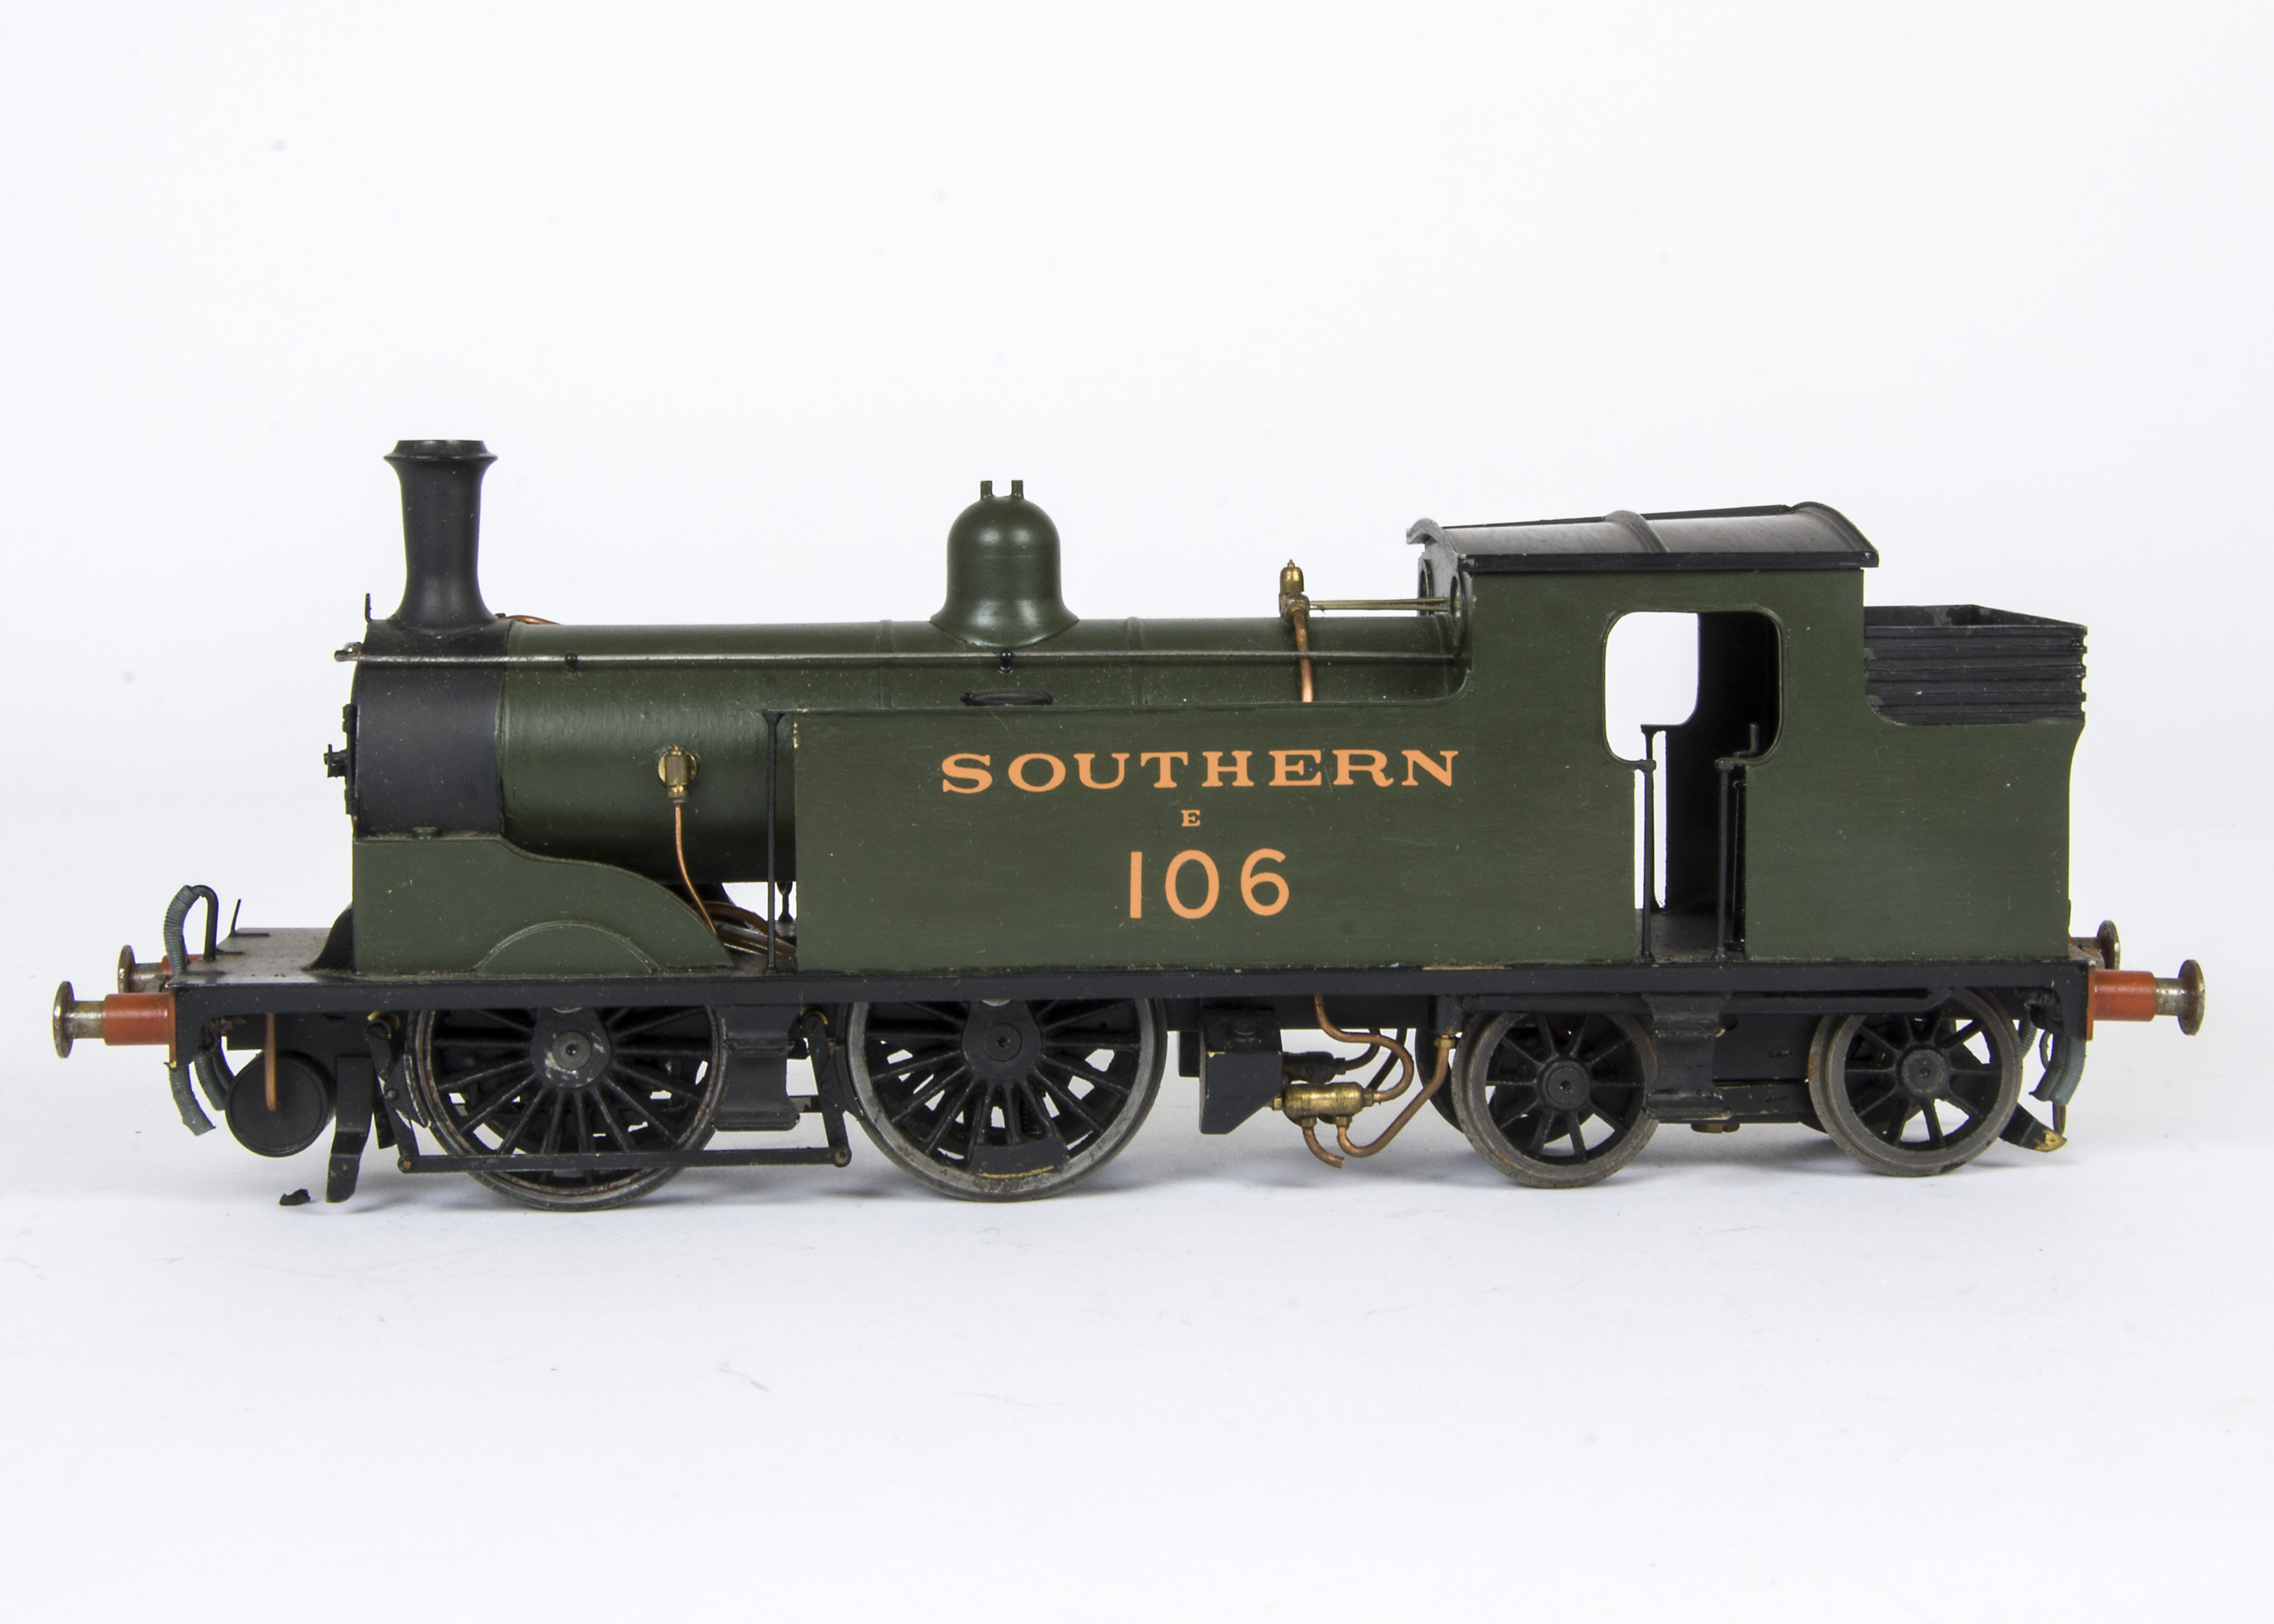 A Finescale O Gauge Ex-L&SWR 'M7' class 0-4-4T Locomotive, from a kit, reasonably well-finished in